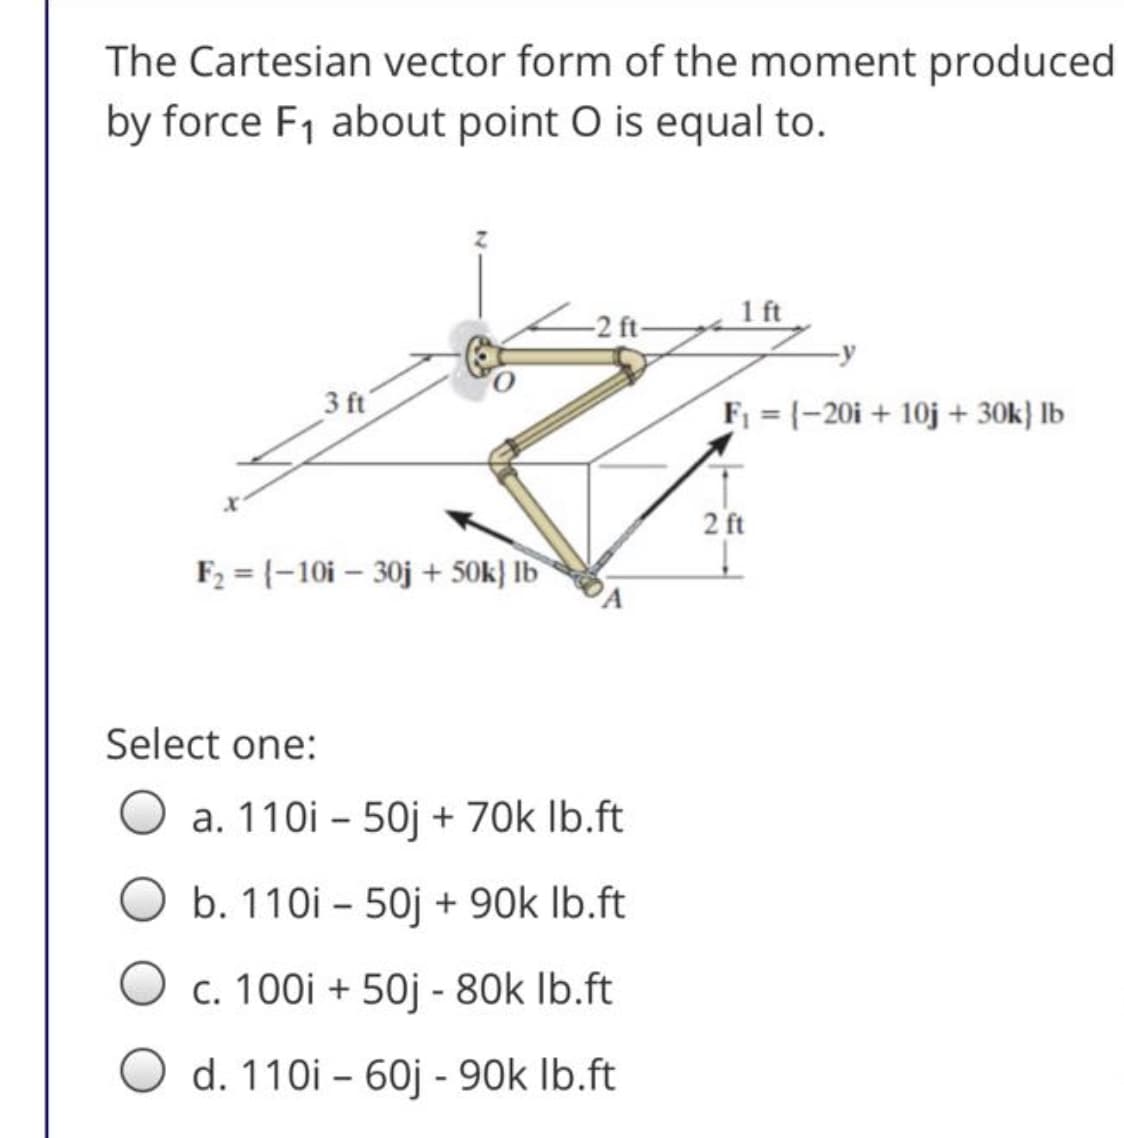 The Cartesian vector form of the moment produced
by force F1 about point O is equal to.
1 ft
-2 ft-
3 ft
F1 = (-20i + 10j + 30k} lb
2 ft
F2 = {-10i – 30j + 50k} lb
PA
Select one:
a. 110i – 50j + 70k Ib.ft
b. 110i - 50j + 90k Ib.ft
c. 100i + 50j - 80k Ib.ft
O d. 110i – 60j - 90k Ib.ft
